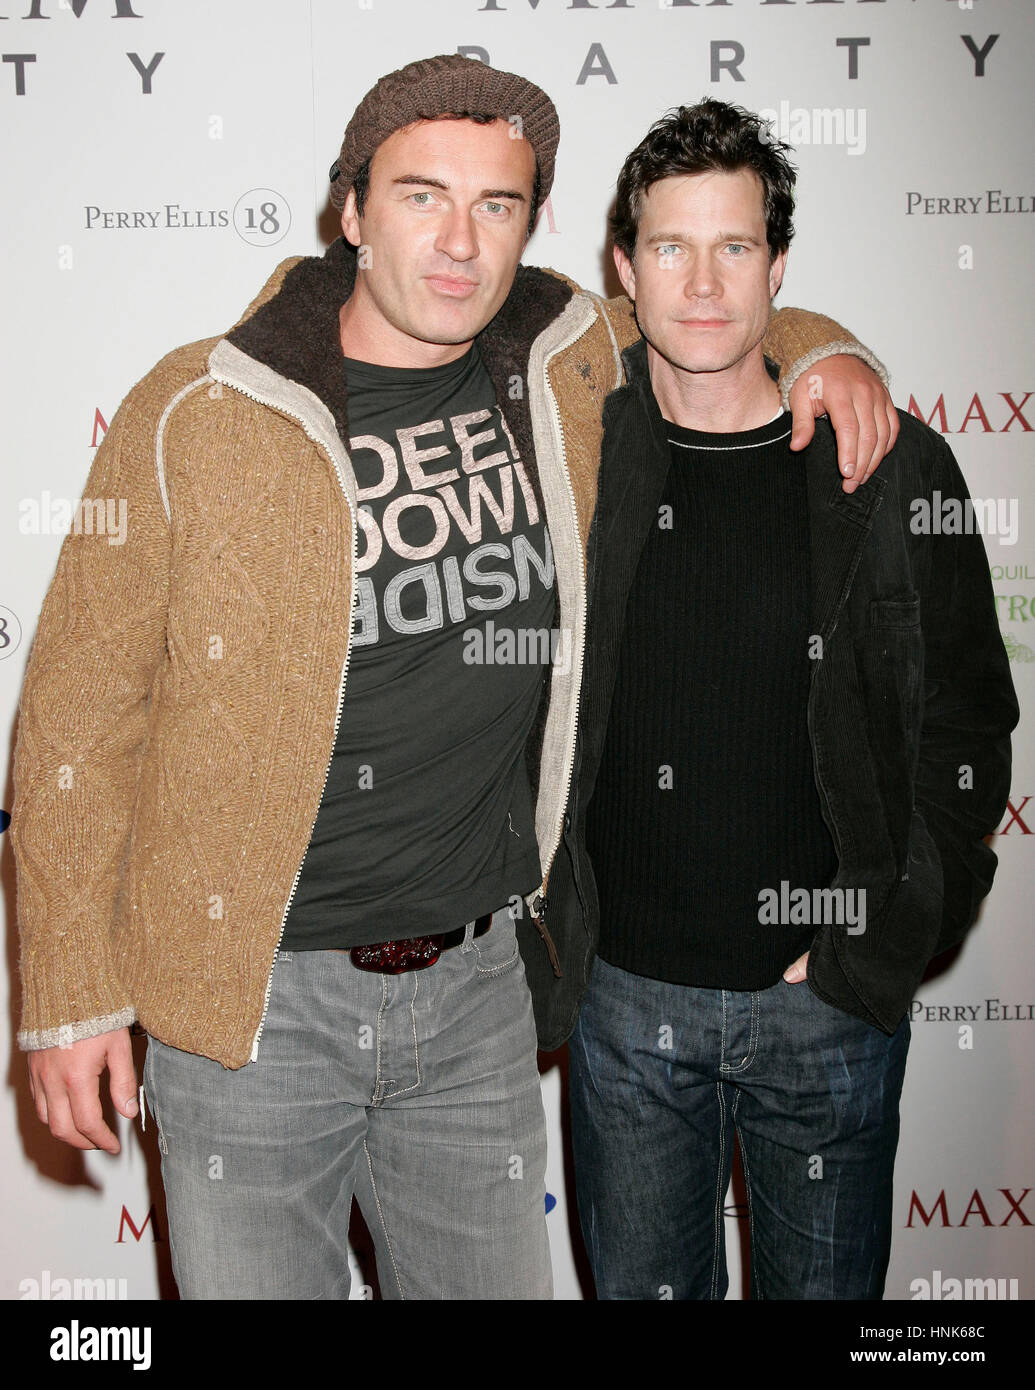 Julian McMahon, left, and Dylan Walsh arrives at the Maxim Super Bowl party at the Stone Rose at the Fairmont Scottsdale Princess in Scottsdale, AZ on Friday, Feb. 1, 2008. Photo by Francis Specker Stock Photo